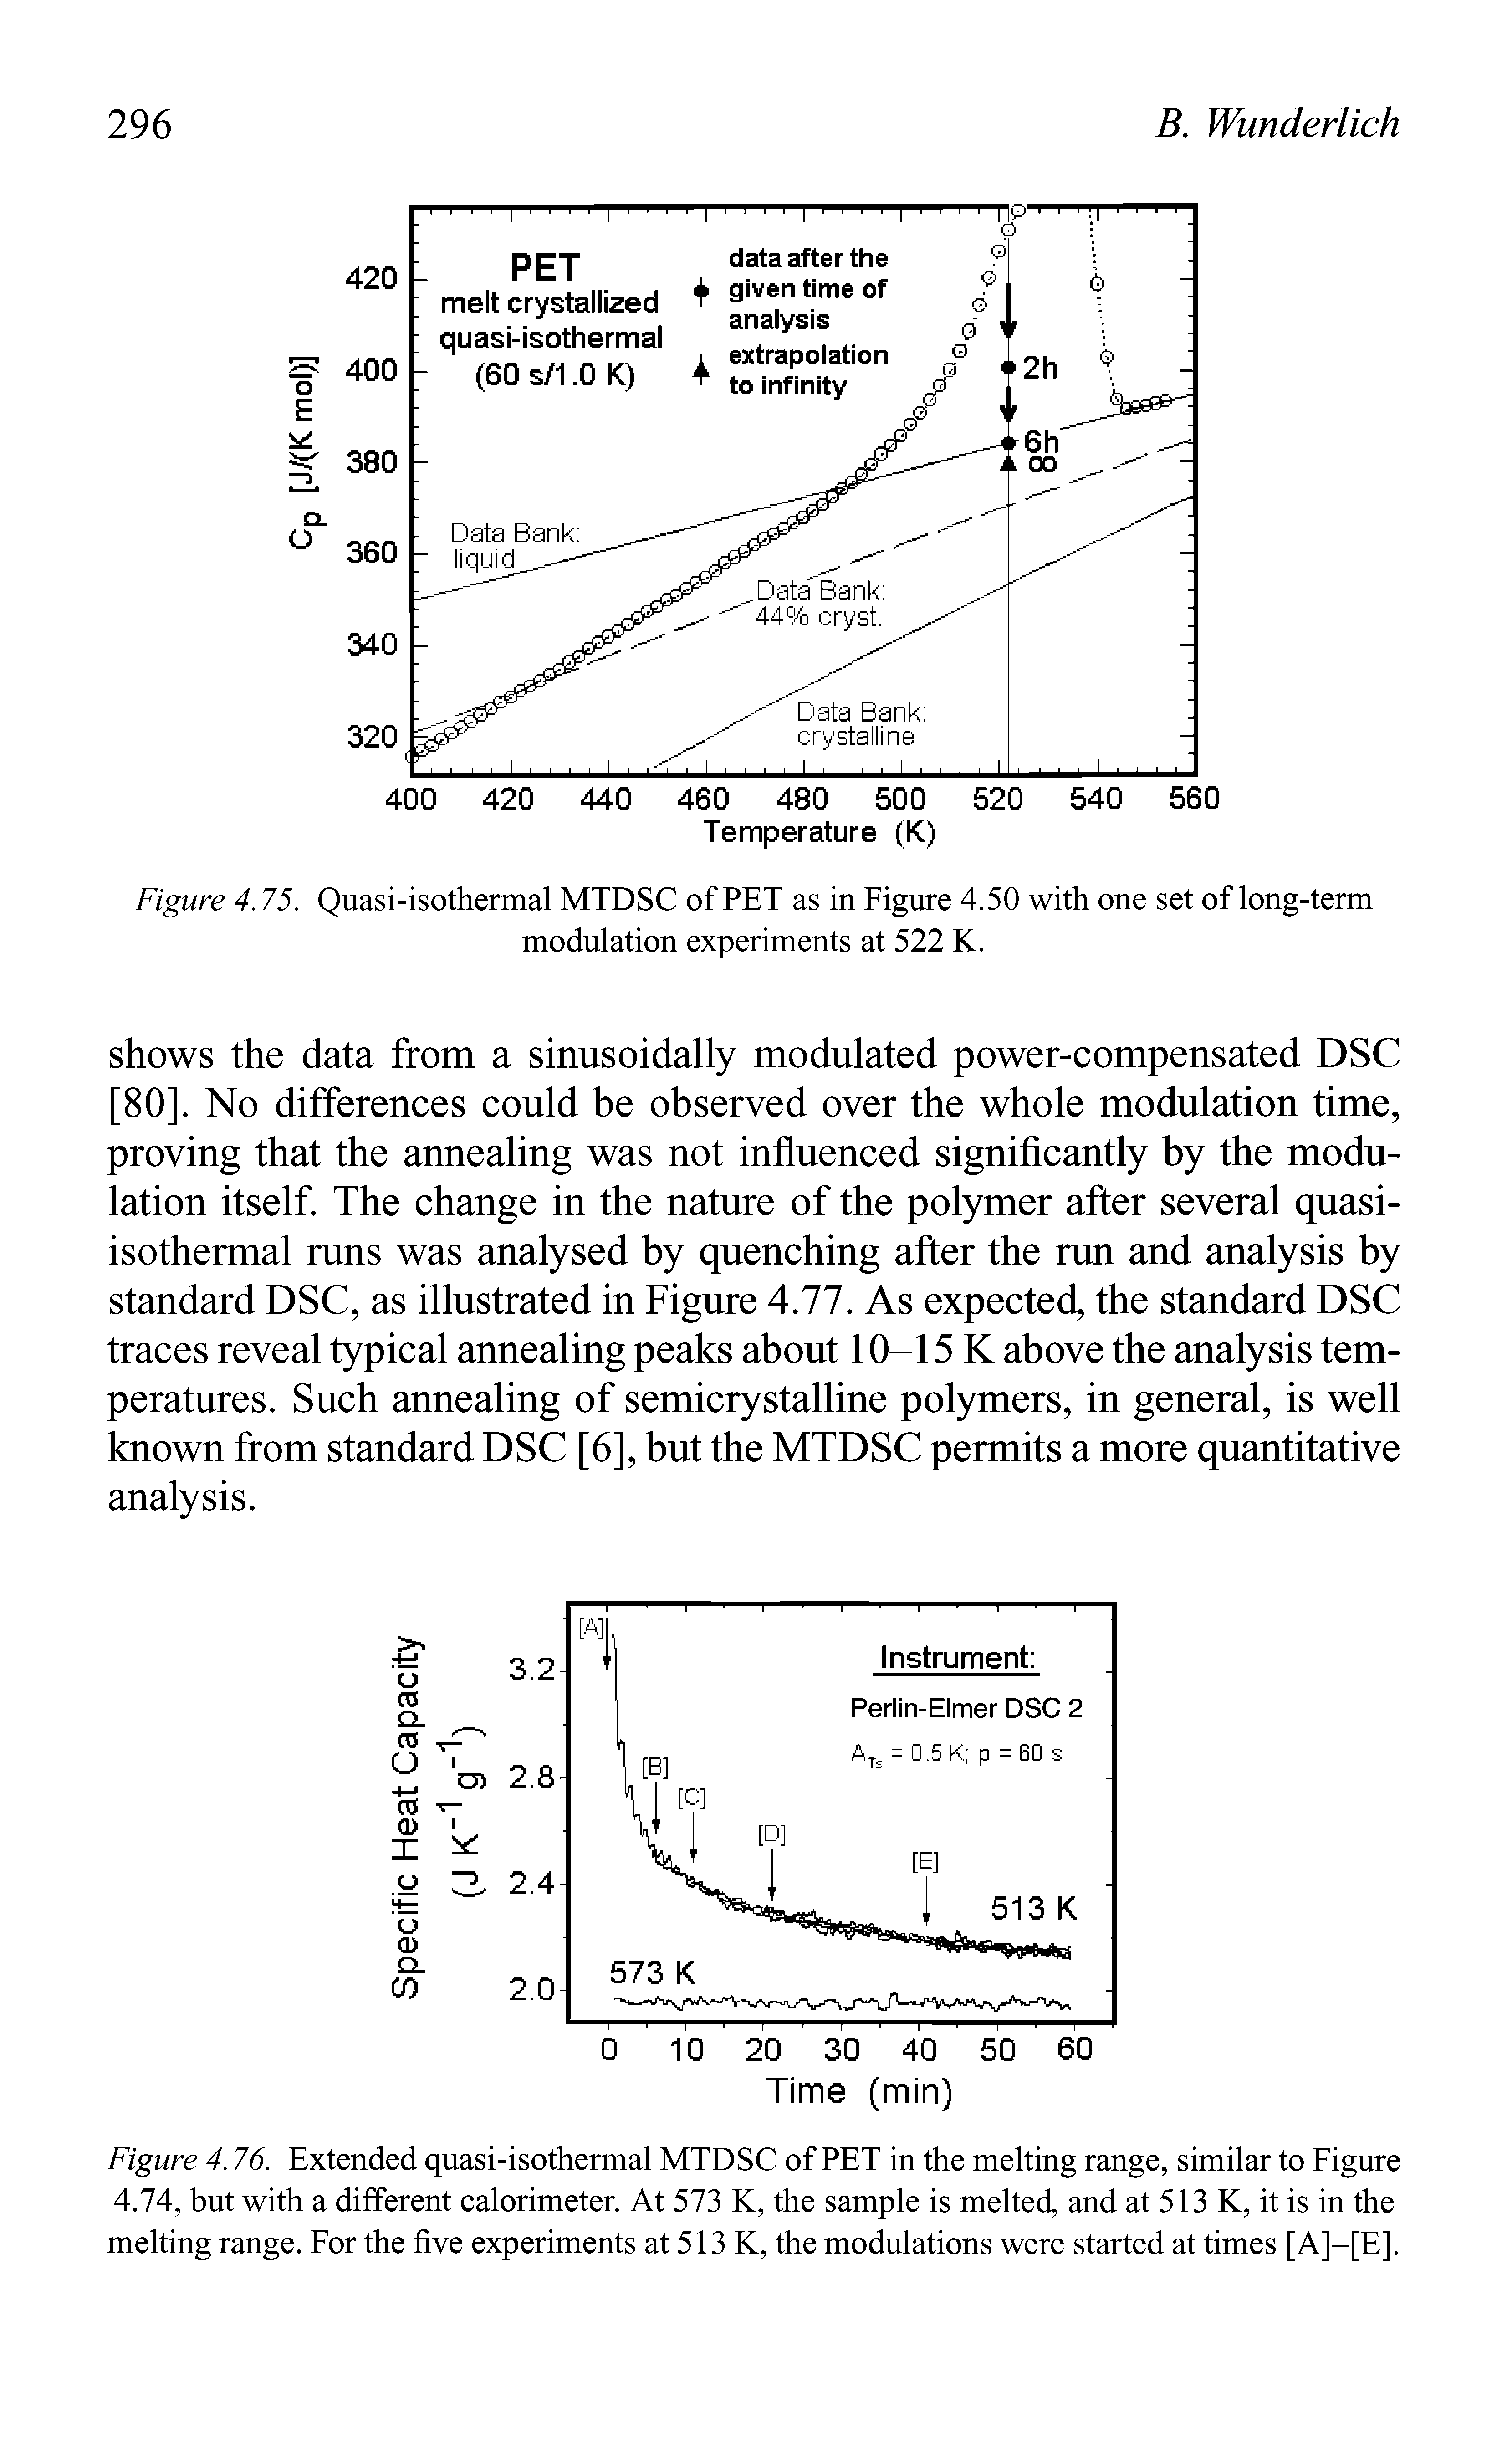 Figure 4.76. Extended quasi-isothermal MTDSC of PET in the melting range, similar to Figure 4.74, but with a diiferent calorimeter. At 573 K, the sample is melted, and at 513 K, it is in the melting range. For the five experiments at 513 K, the modulations were started at times [A]-[E].